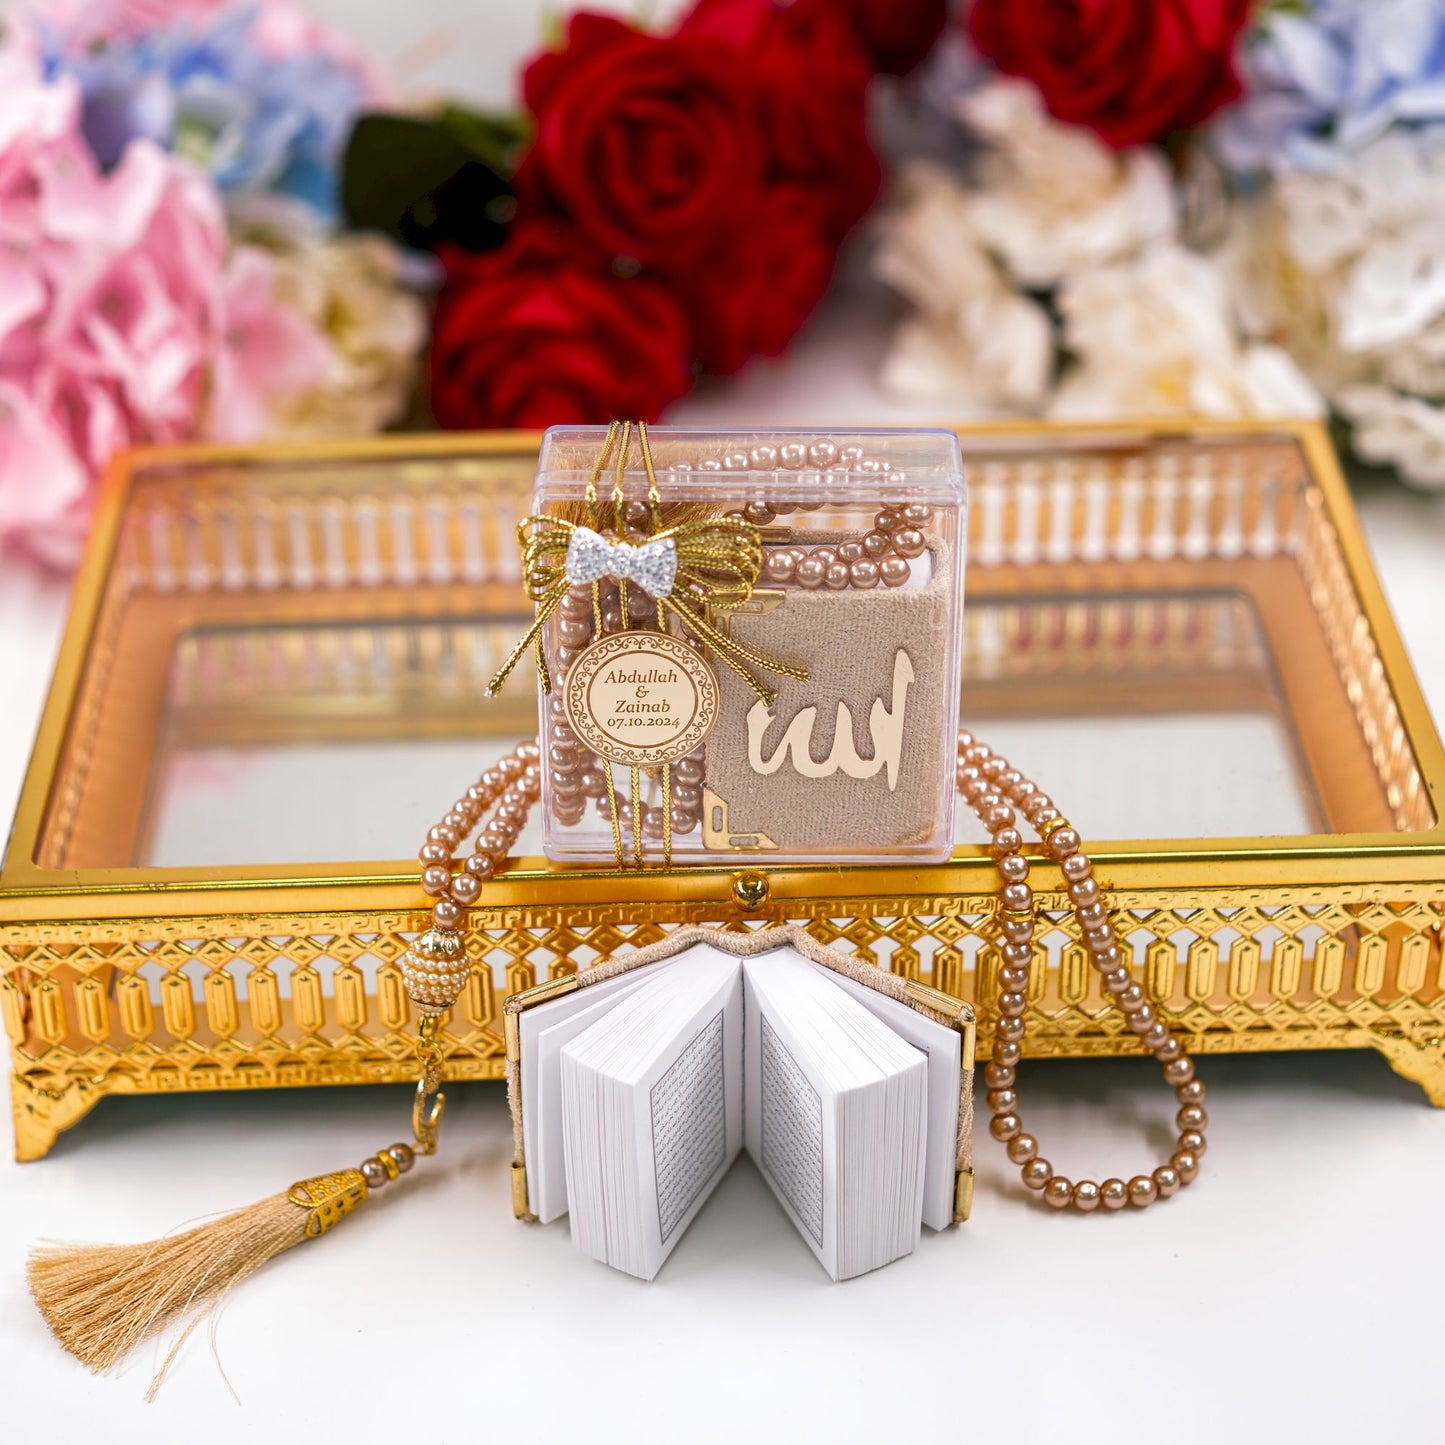 Personalized Mini Quran Prayer Beads Bow Tie with Plexi Wedding Favor - Islamic Elite Favors is a handmade gift shop offering a wide variety of unique and personalized gifts for all occasions. Whether you're looking for the perfect Ramadan, Eid, Hajj, wedding gift or something special for a birthday, baby shower or anniversary, we have something for everyone. High quality, made with love.